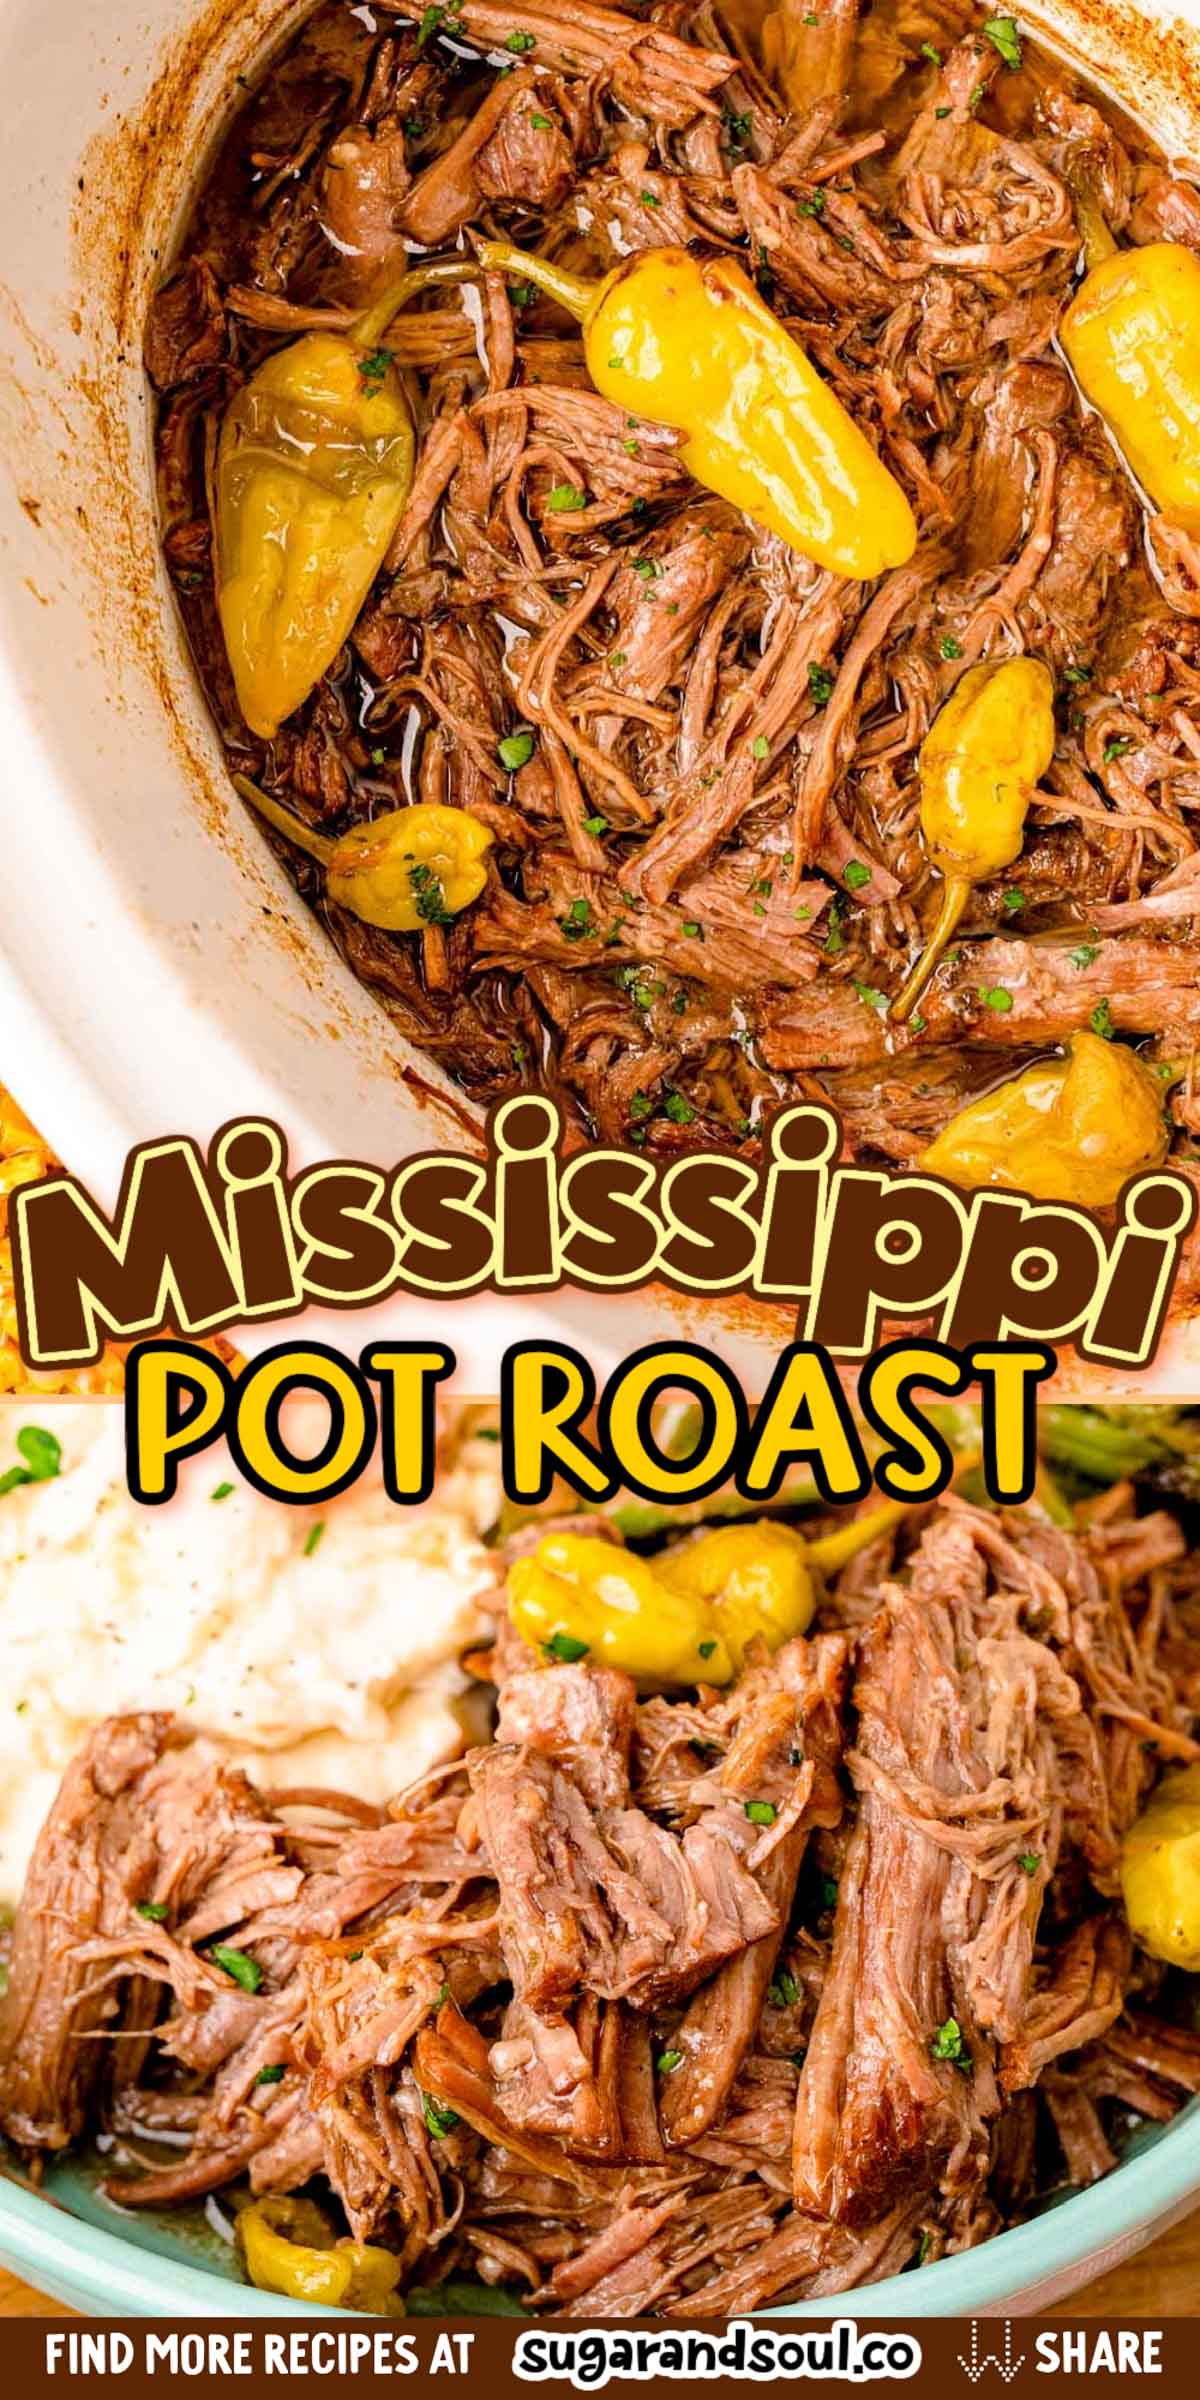 This Slow Cooker Recipe for Mississippi Pot Roast has the most tender, flavor-packed meat you'll ever taste! Seared chuck roast cooked low and slow with pepperoncini peppers yields melt-in-your-mouth beef for a meal made quickly with simple ingredients and only 10 minutes of hands-on prep! via @sugarandsoulco